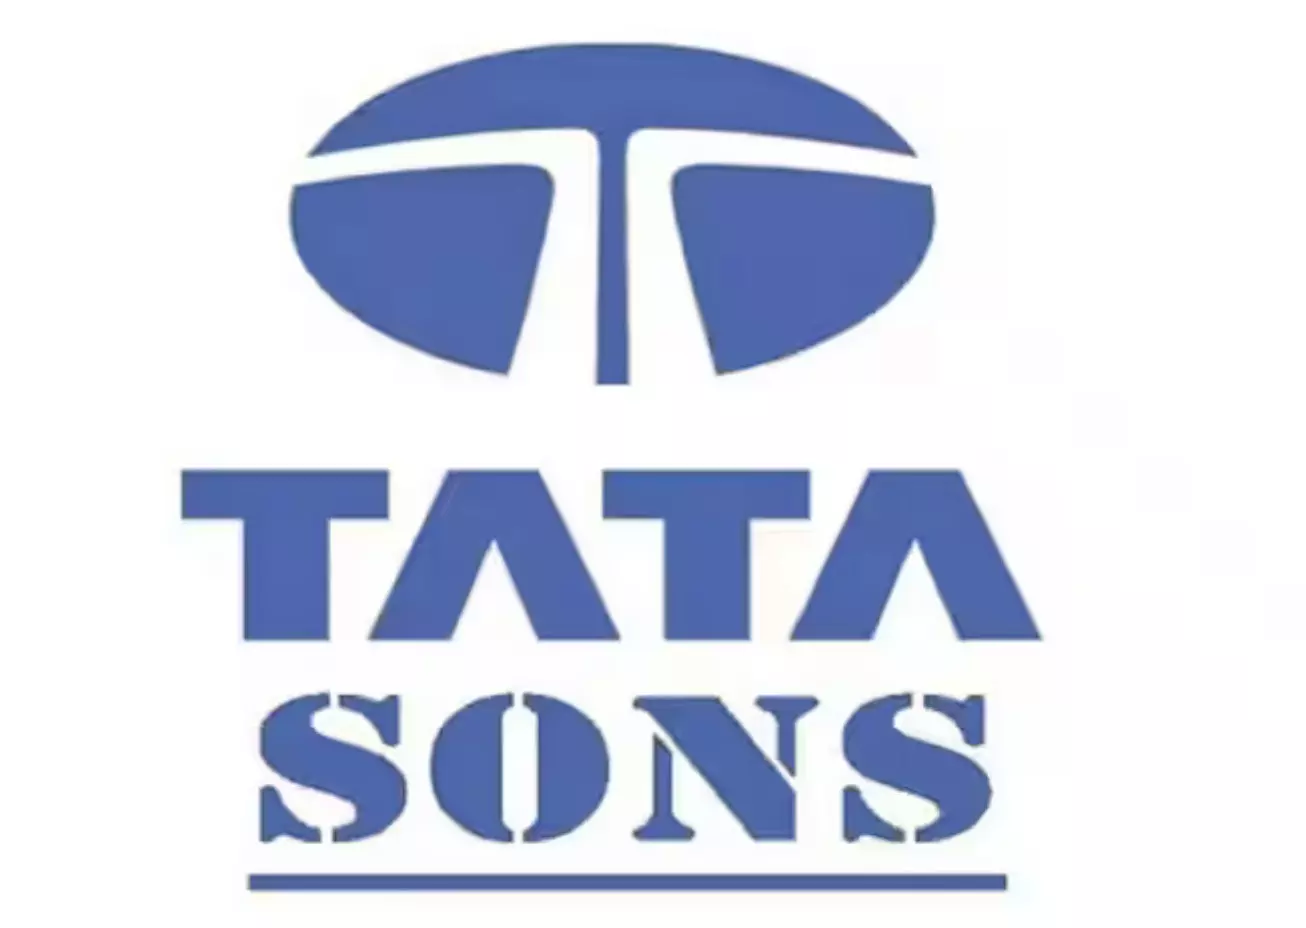 Tata Sons plans IPO launch to raise ₹55,000 crore